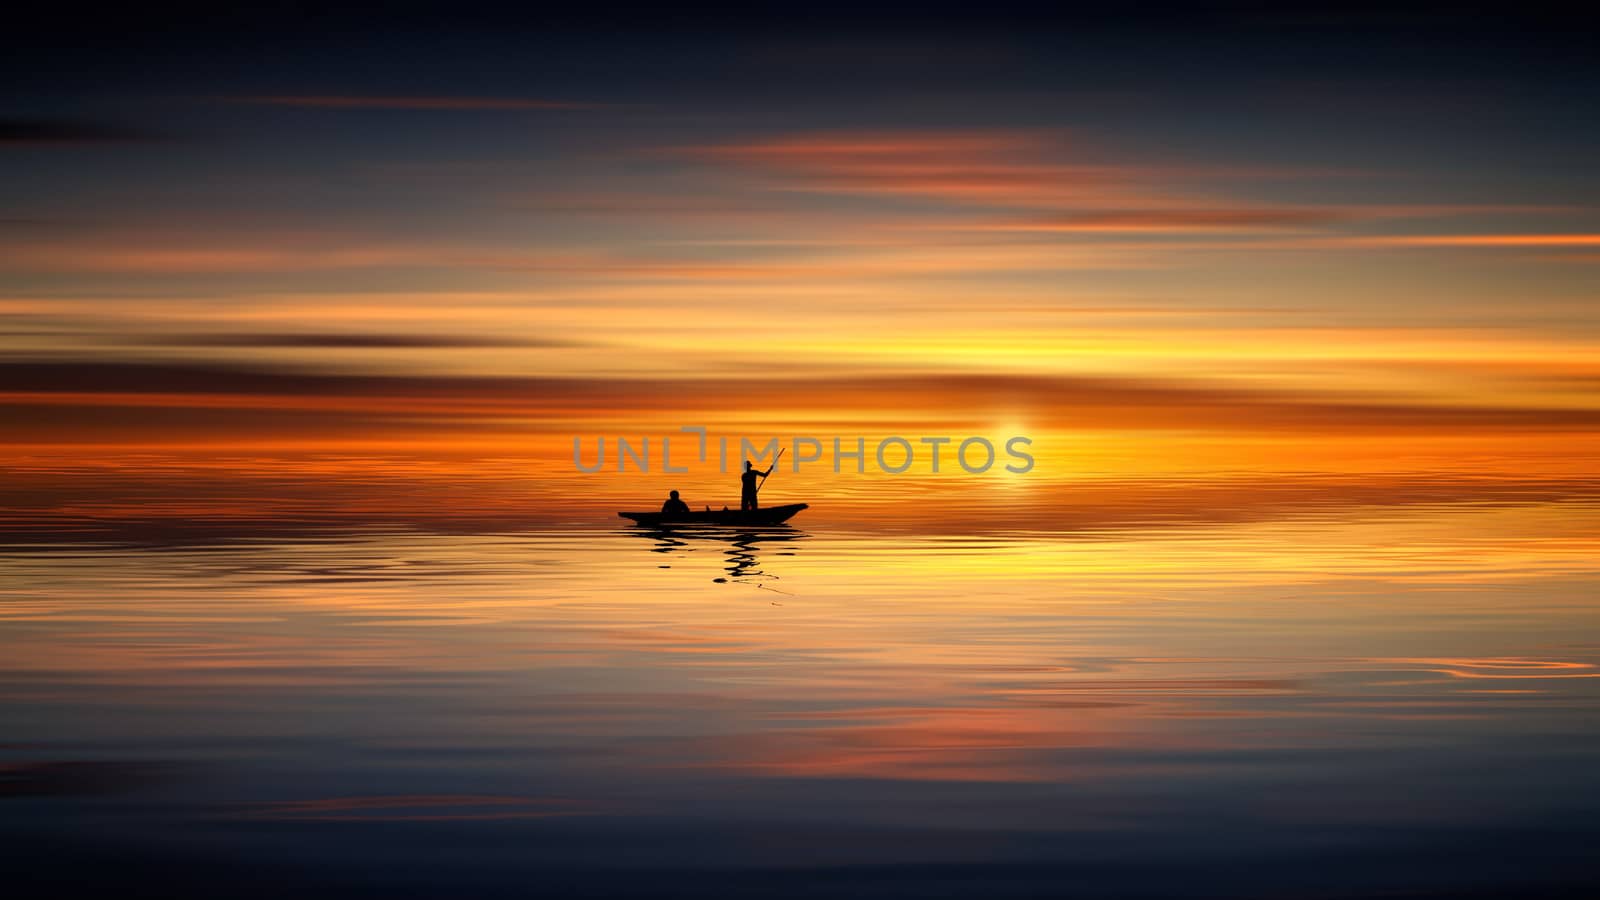 Two men fishing in a boat in lake during sunset. Geographical location: Europe by Roman1030